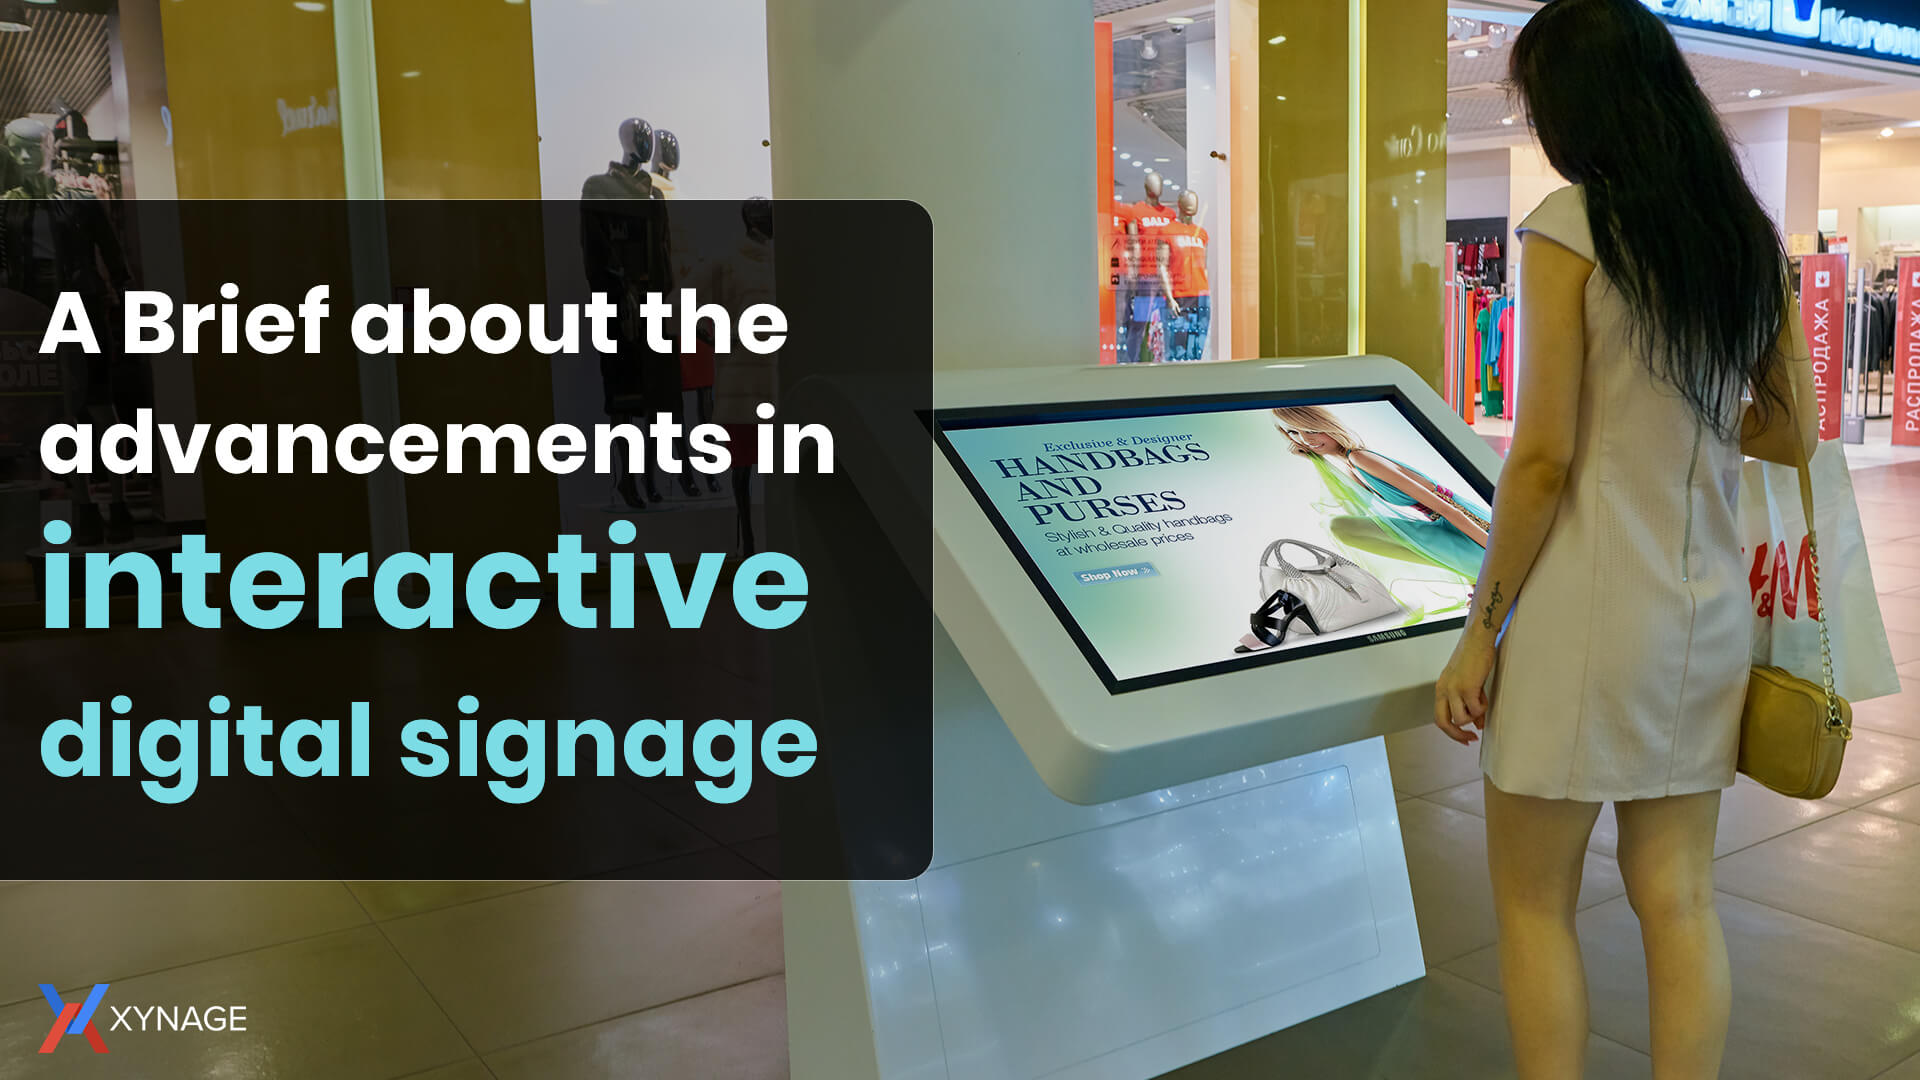 A Brief about the advancements in interactive digital signage